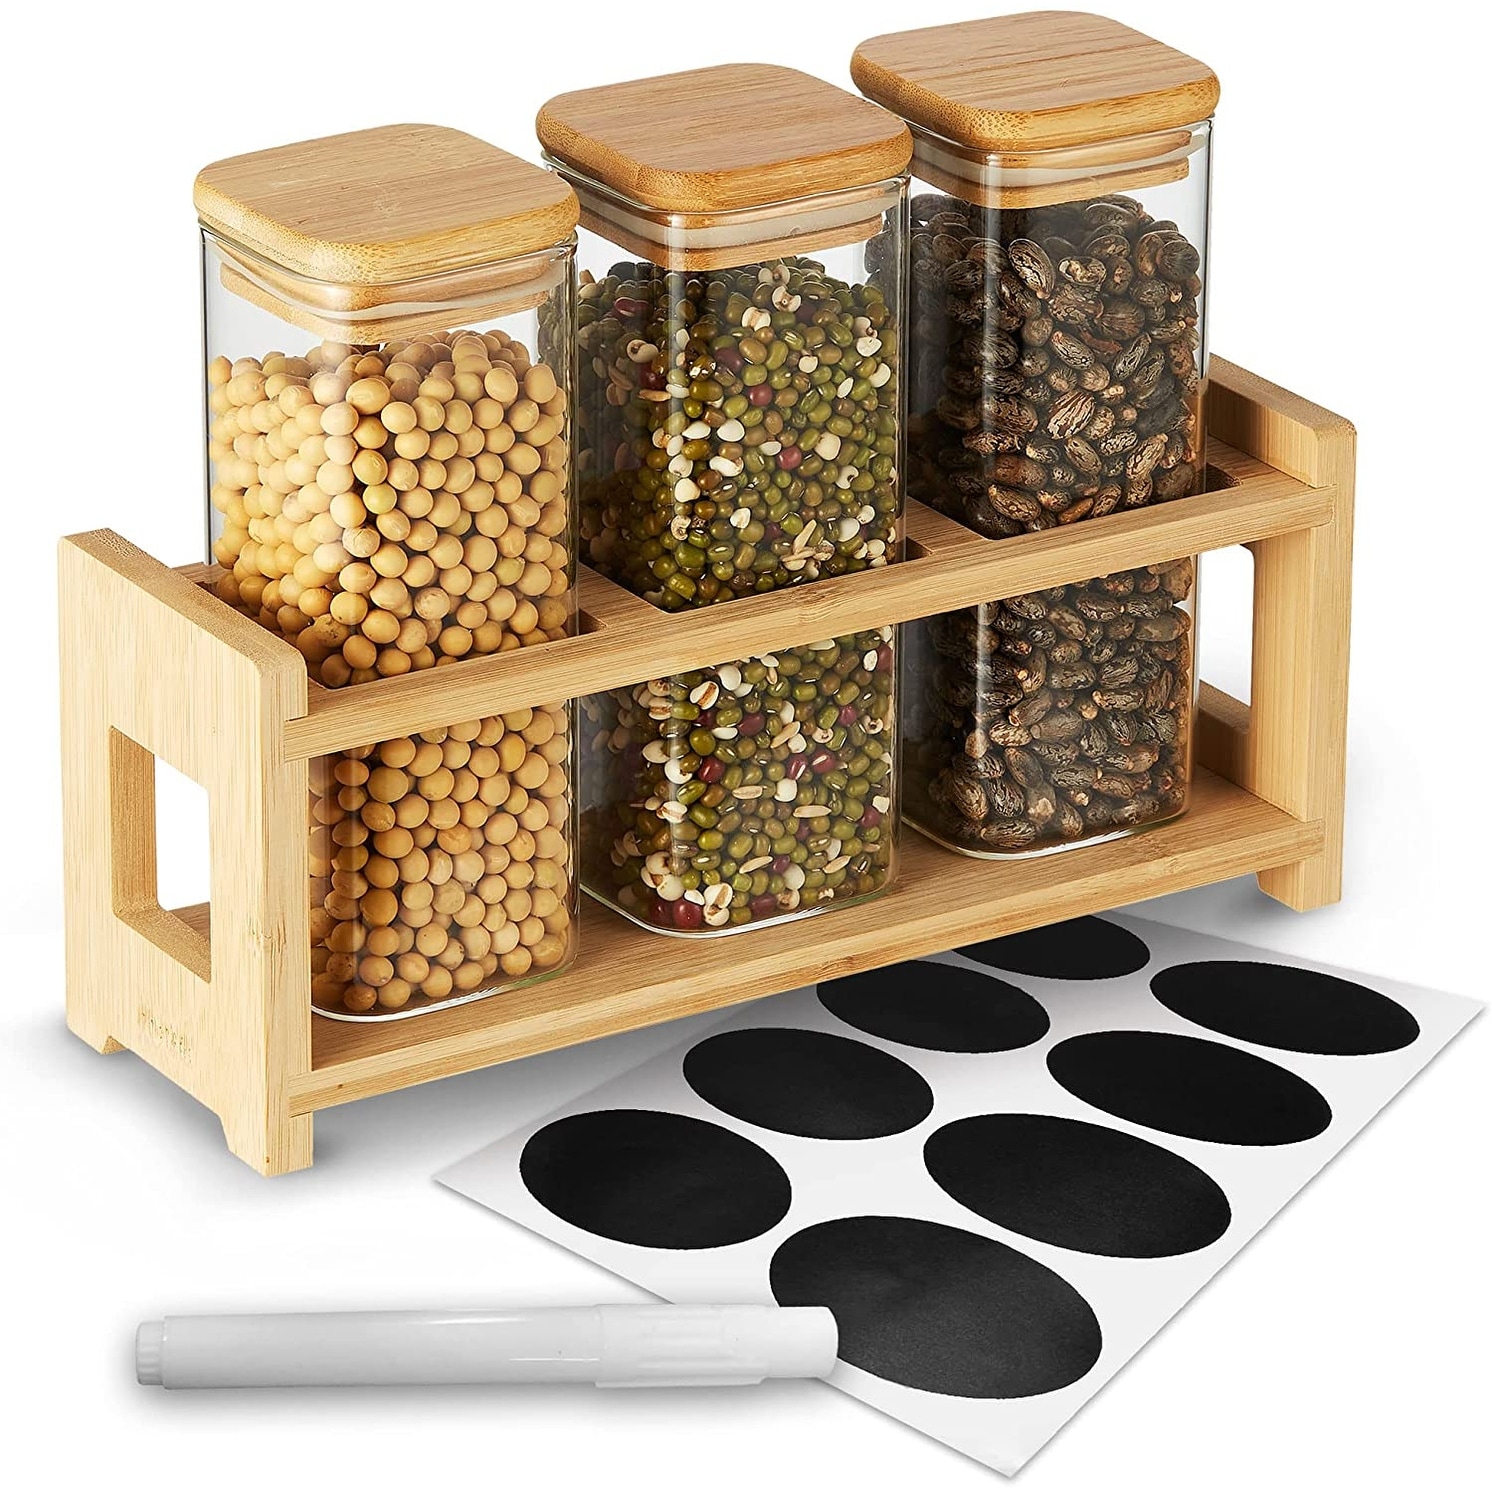 https://ak1.ostkcdn.com/images/products/is/images/direct/421e60ead9a63d8c0246c04f0649783eb9bb488f/Berkware-Glass-Mini-Storage-Jars-with-Bamboo-Lids-and-Display-Stand.jpg